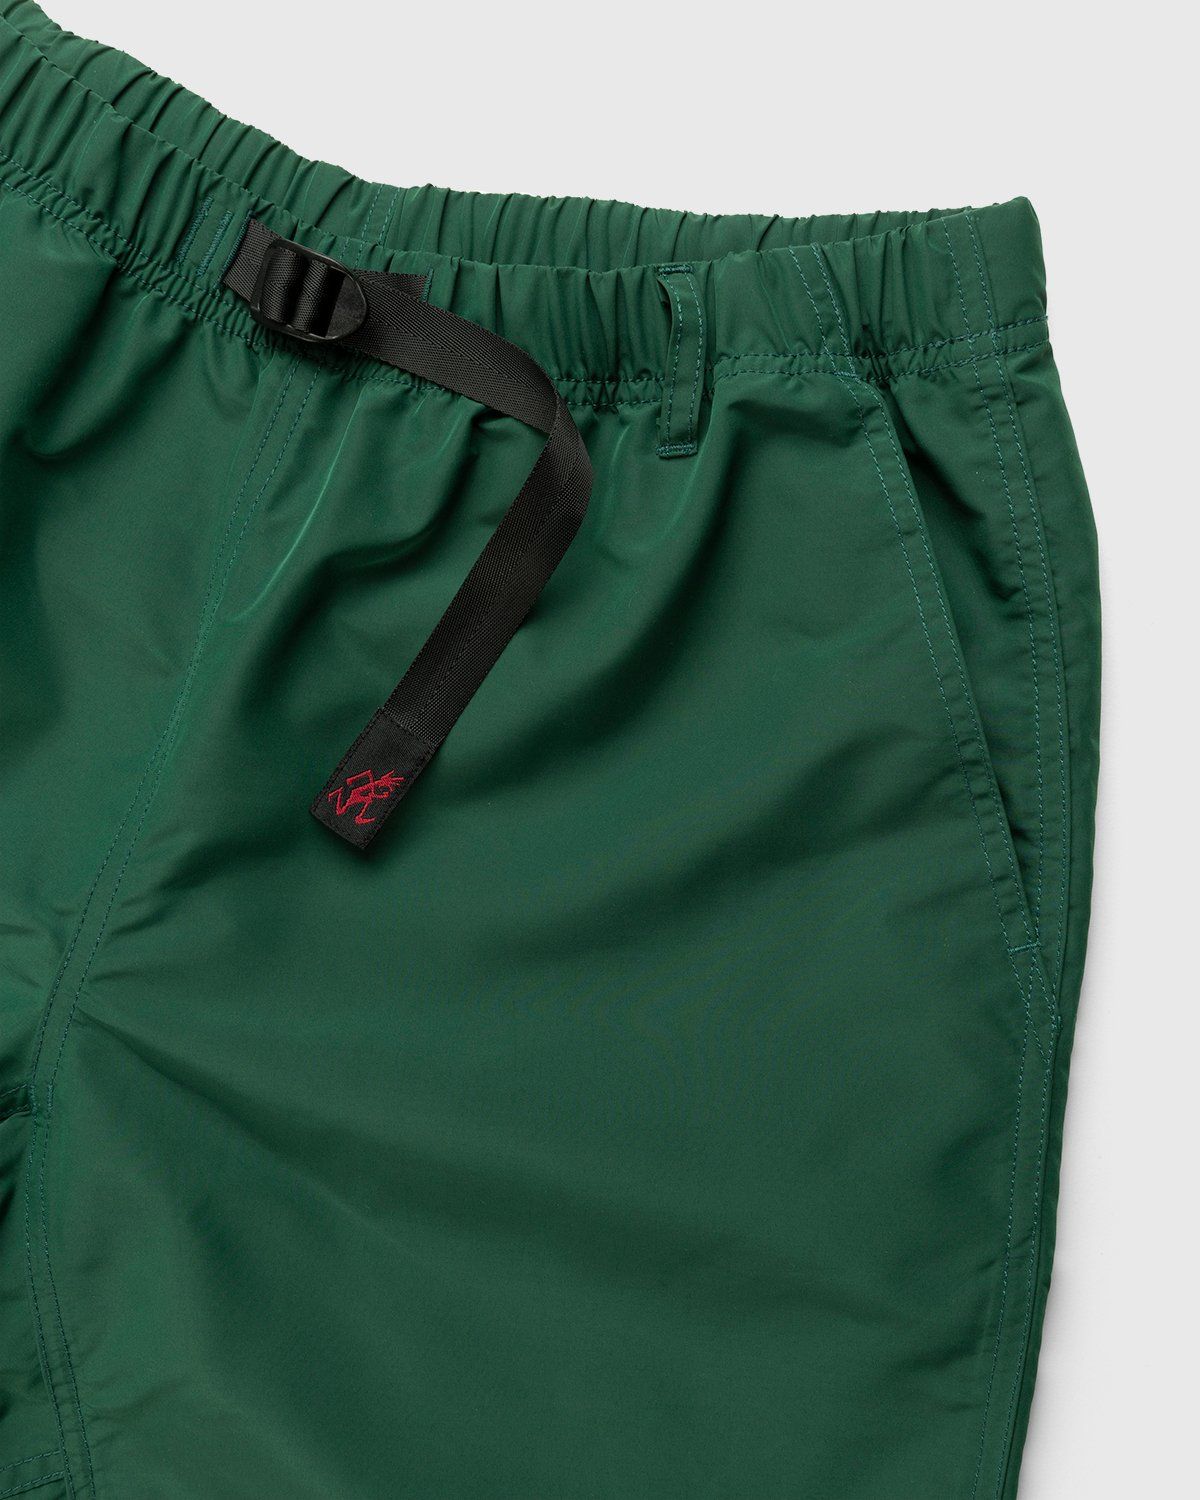 Gramicci x Highsnobiety – HS Sports Shell Packable Shorts Forest Green - Shorts - Green - Image 3